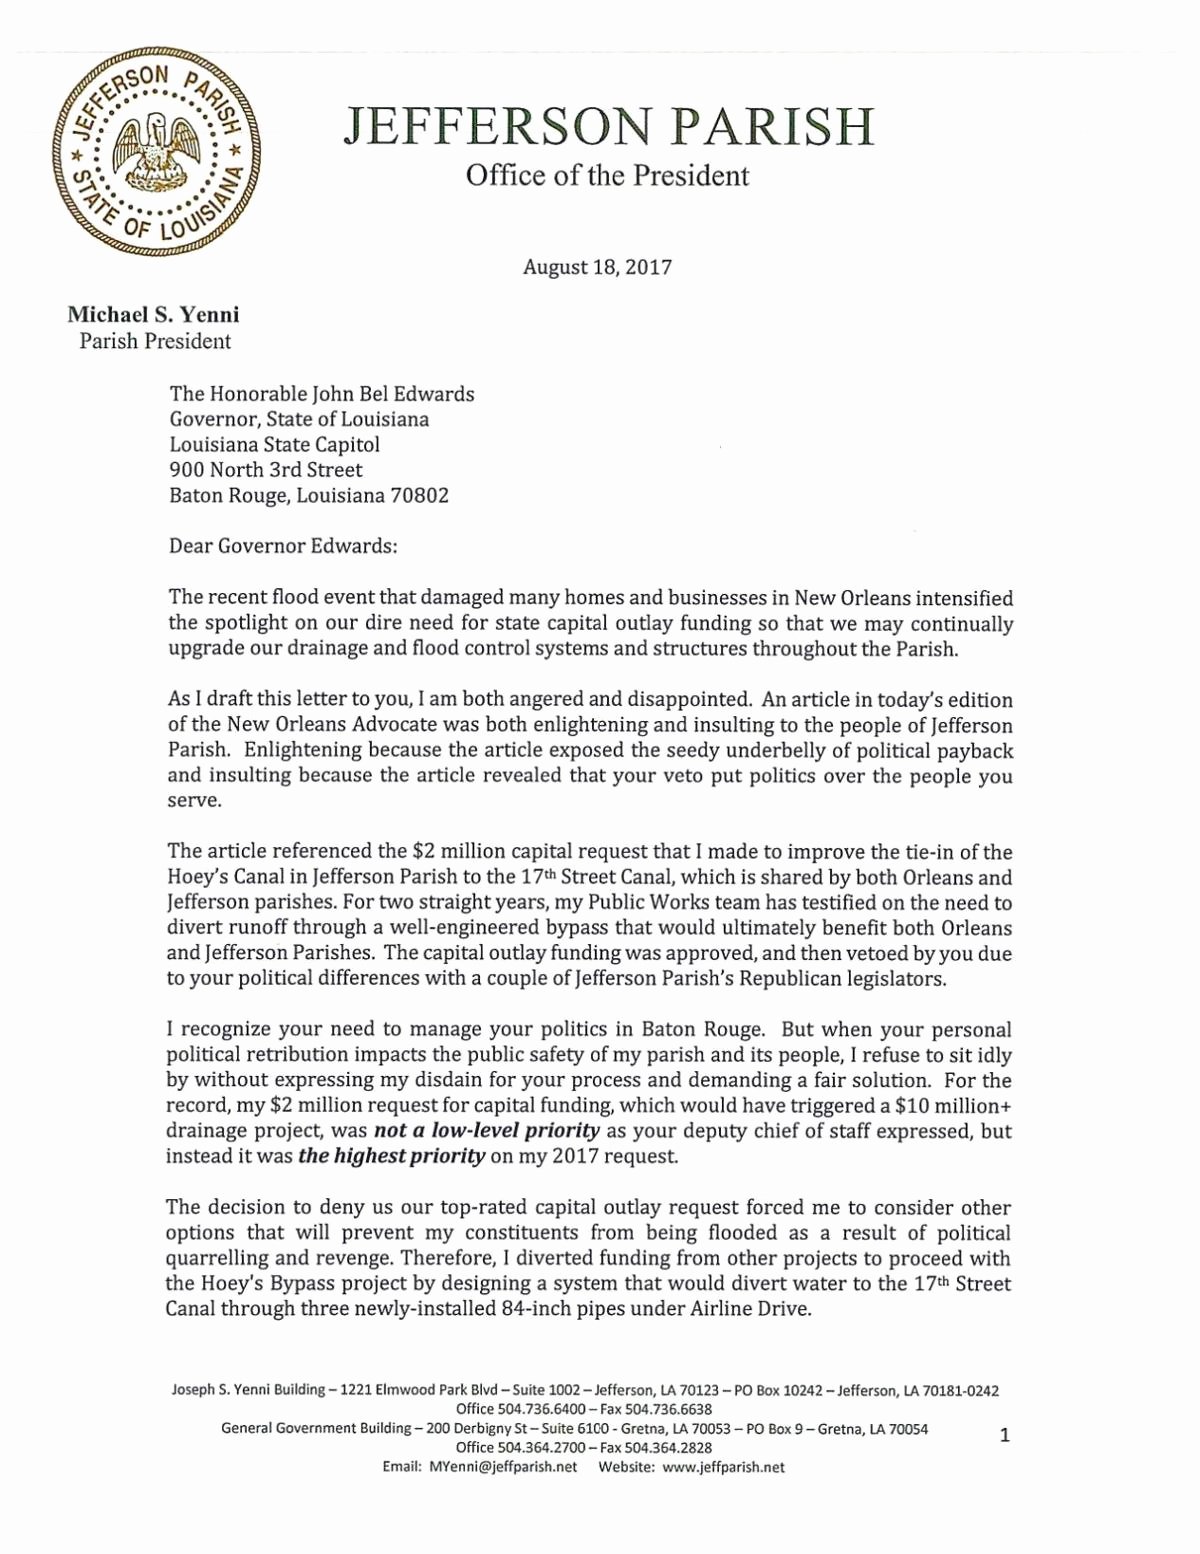 Lox Letter Example Unique Jefferson President Mike Yenni and Gov Edwards Trade